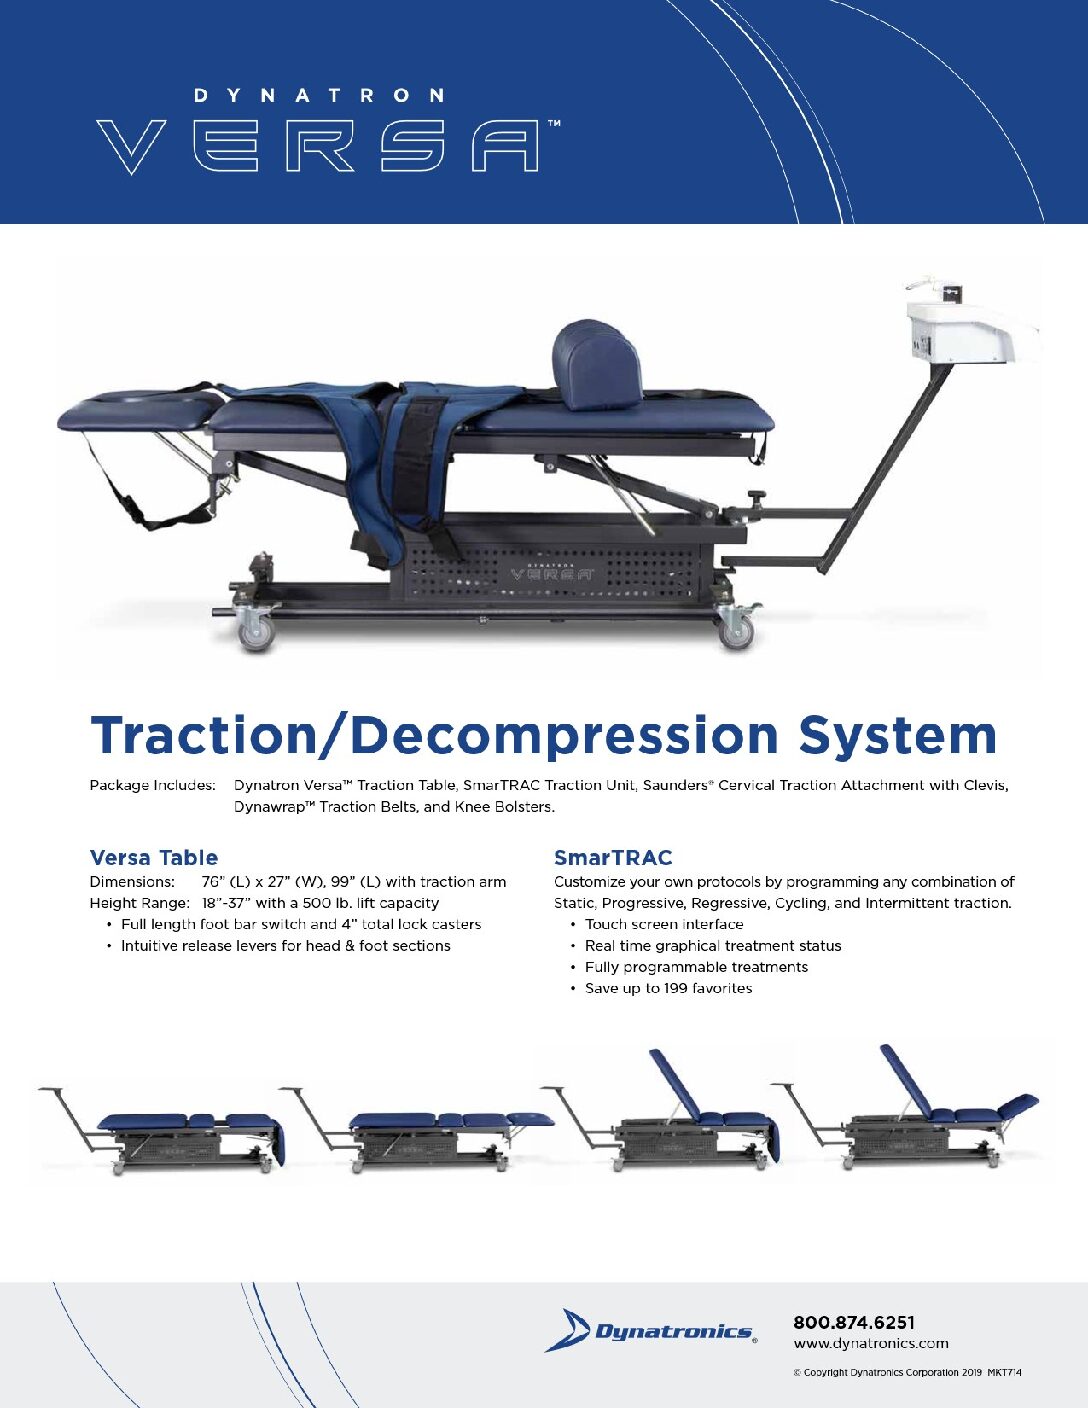 DYNATRONICS VERSA 4 SECTION HI LO TRACTION TABLE